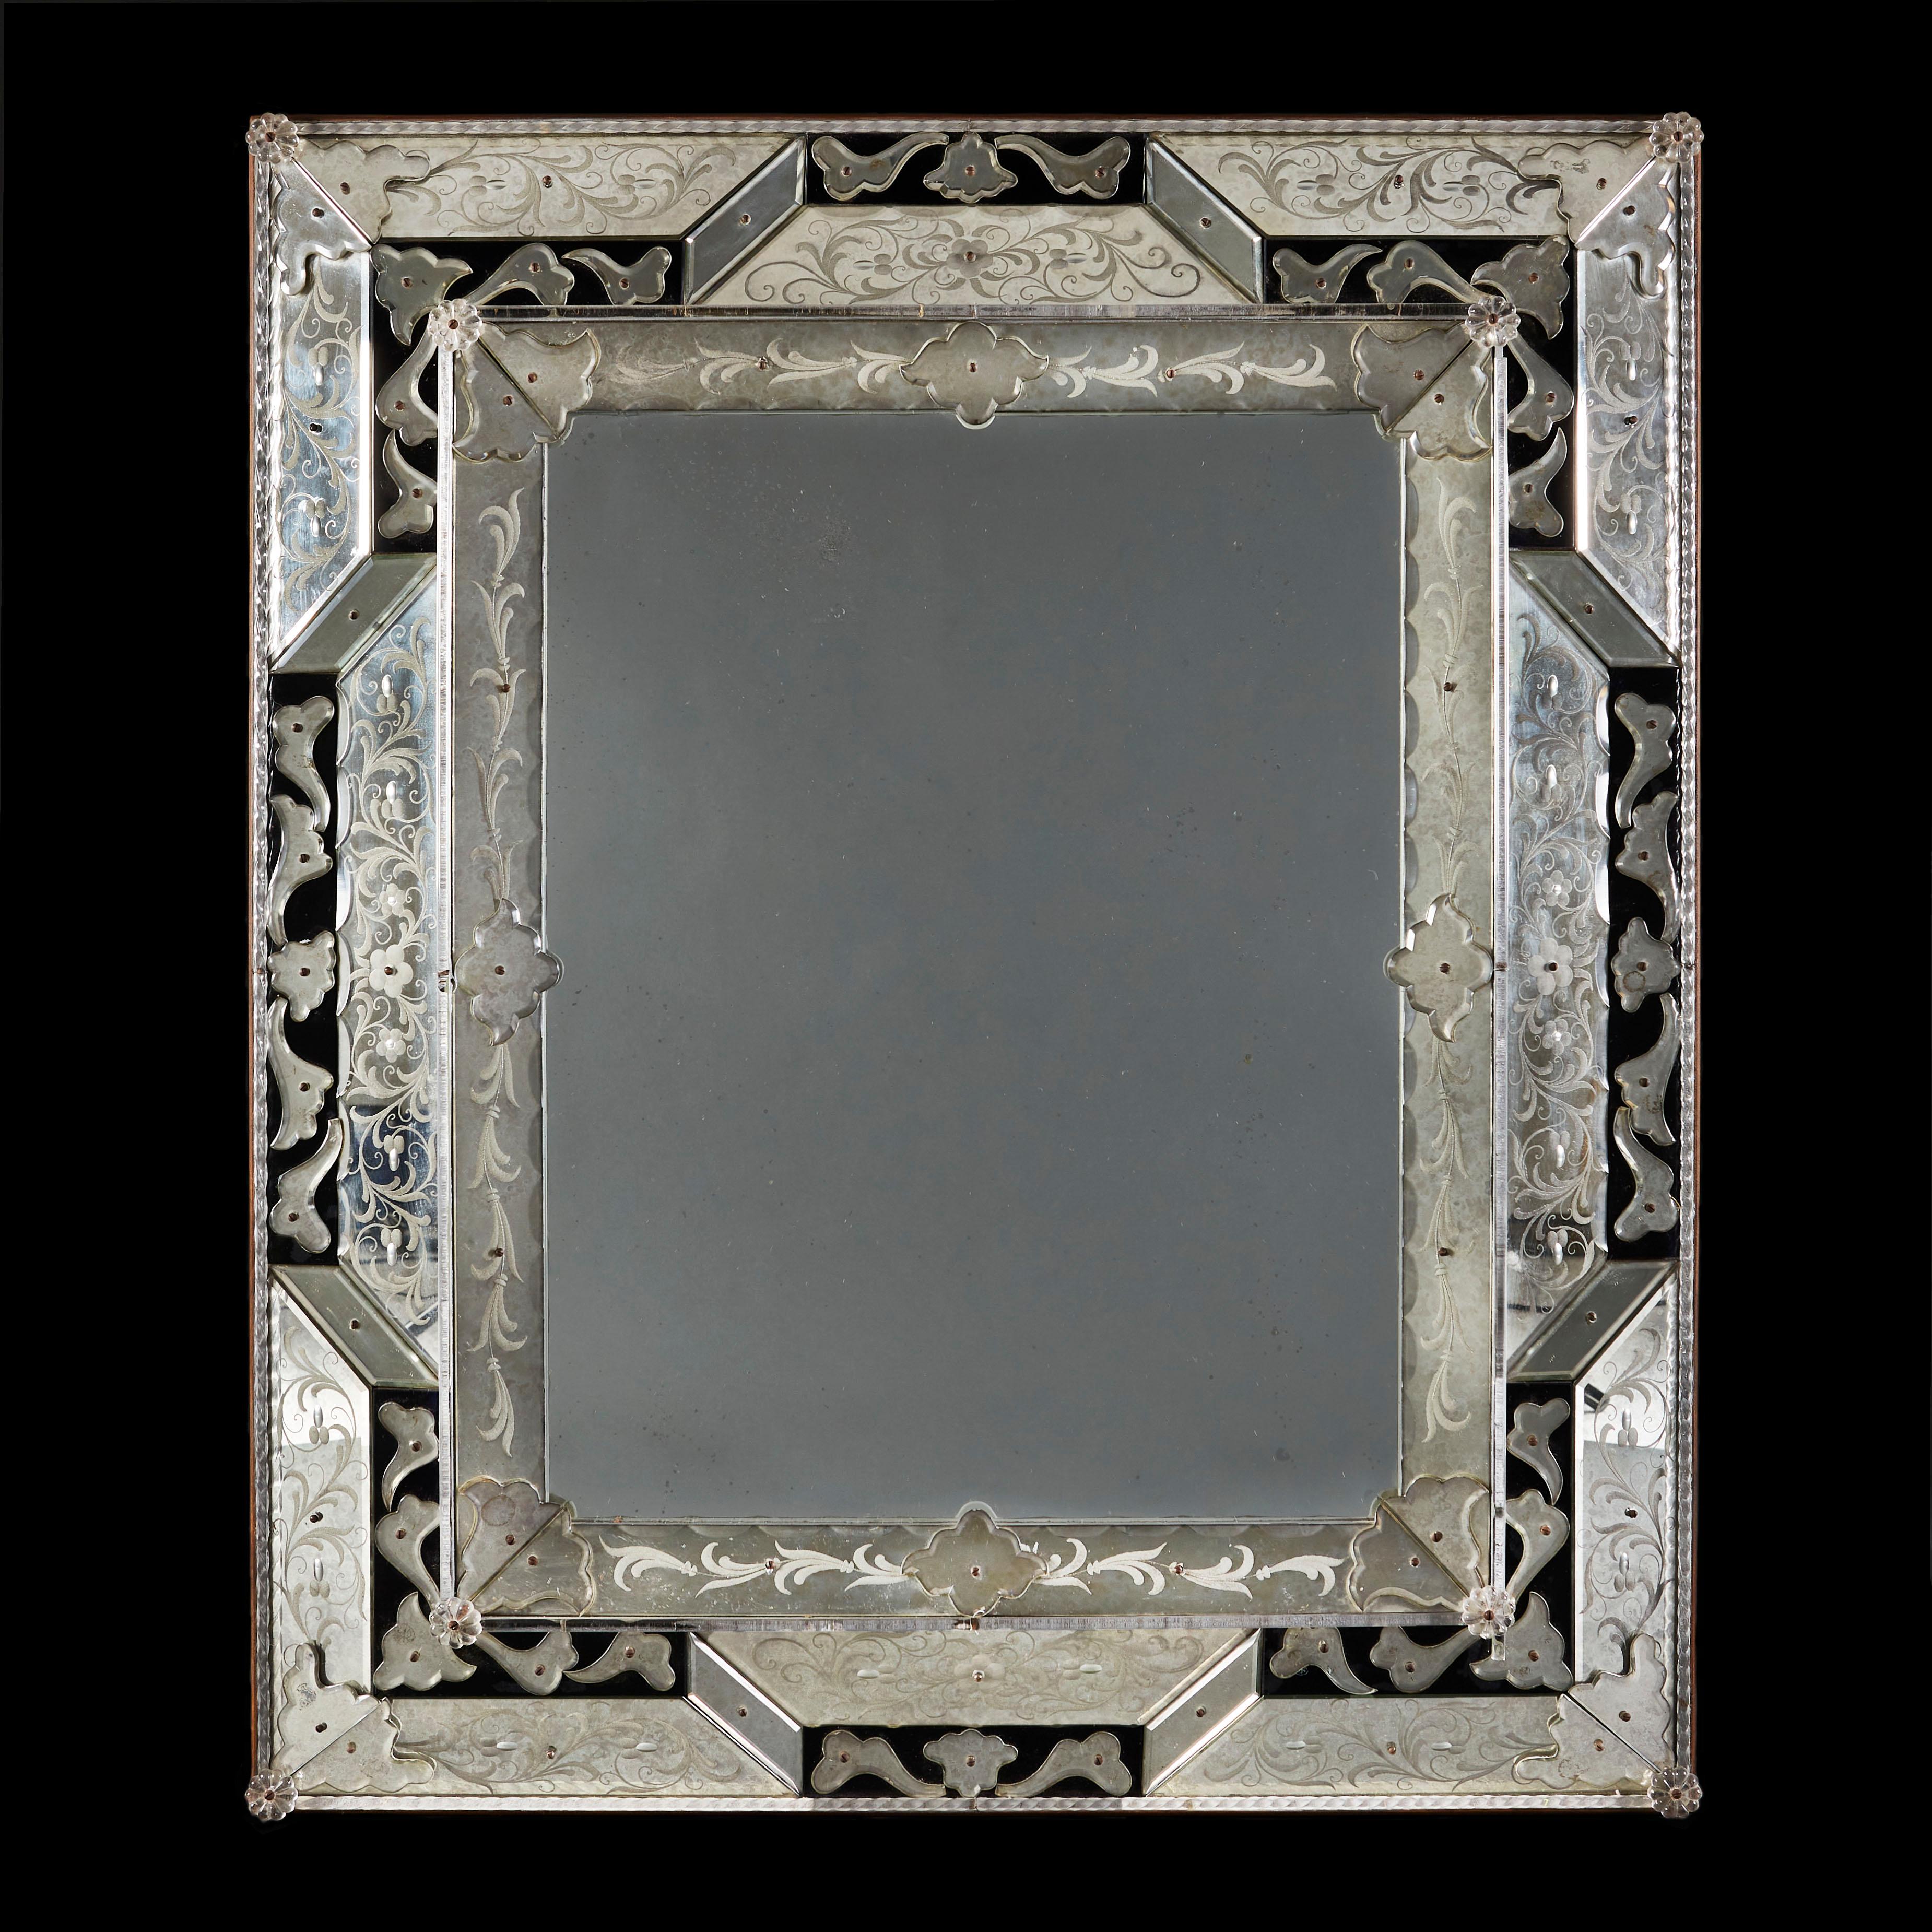 An early twentieth century rectangular Venetian cut glass mirror with panels of black glass and applied cut foliate designs, retaining the original mirror plate.